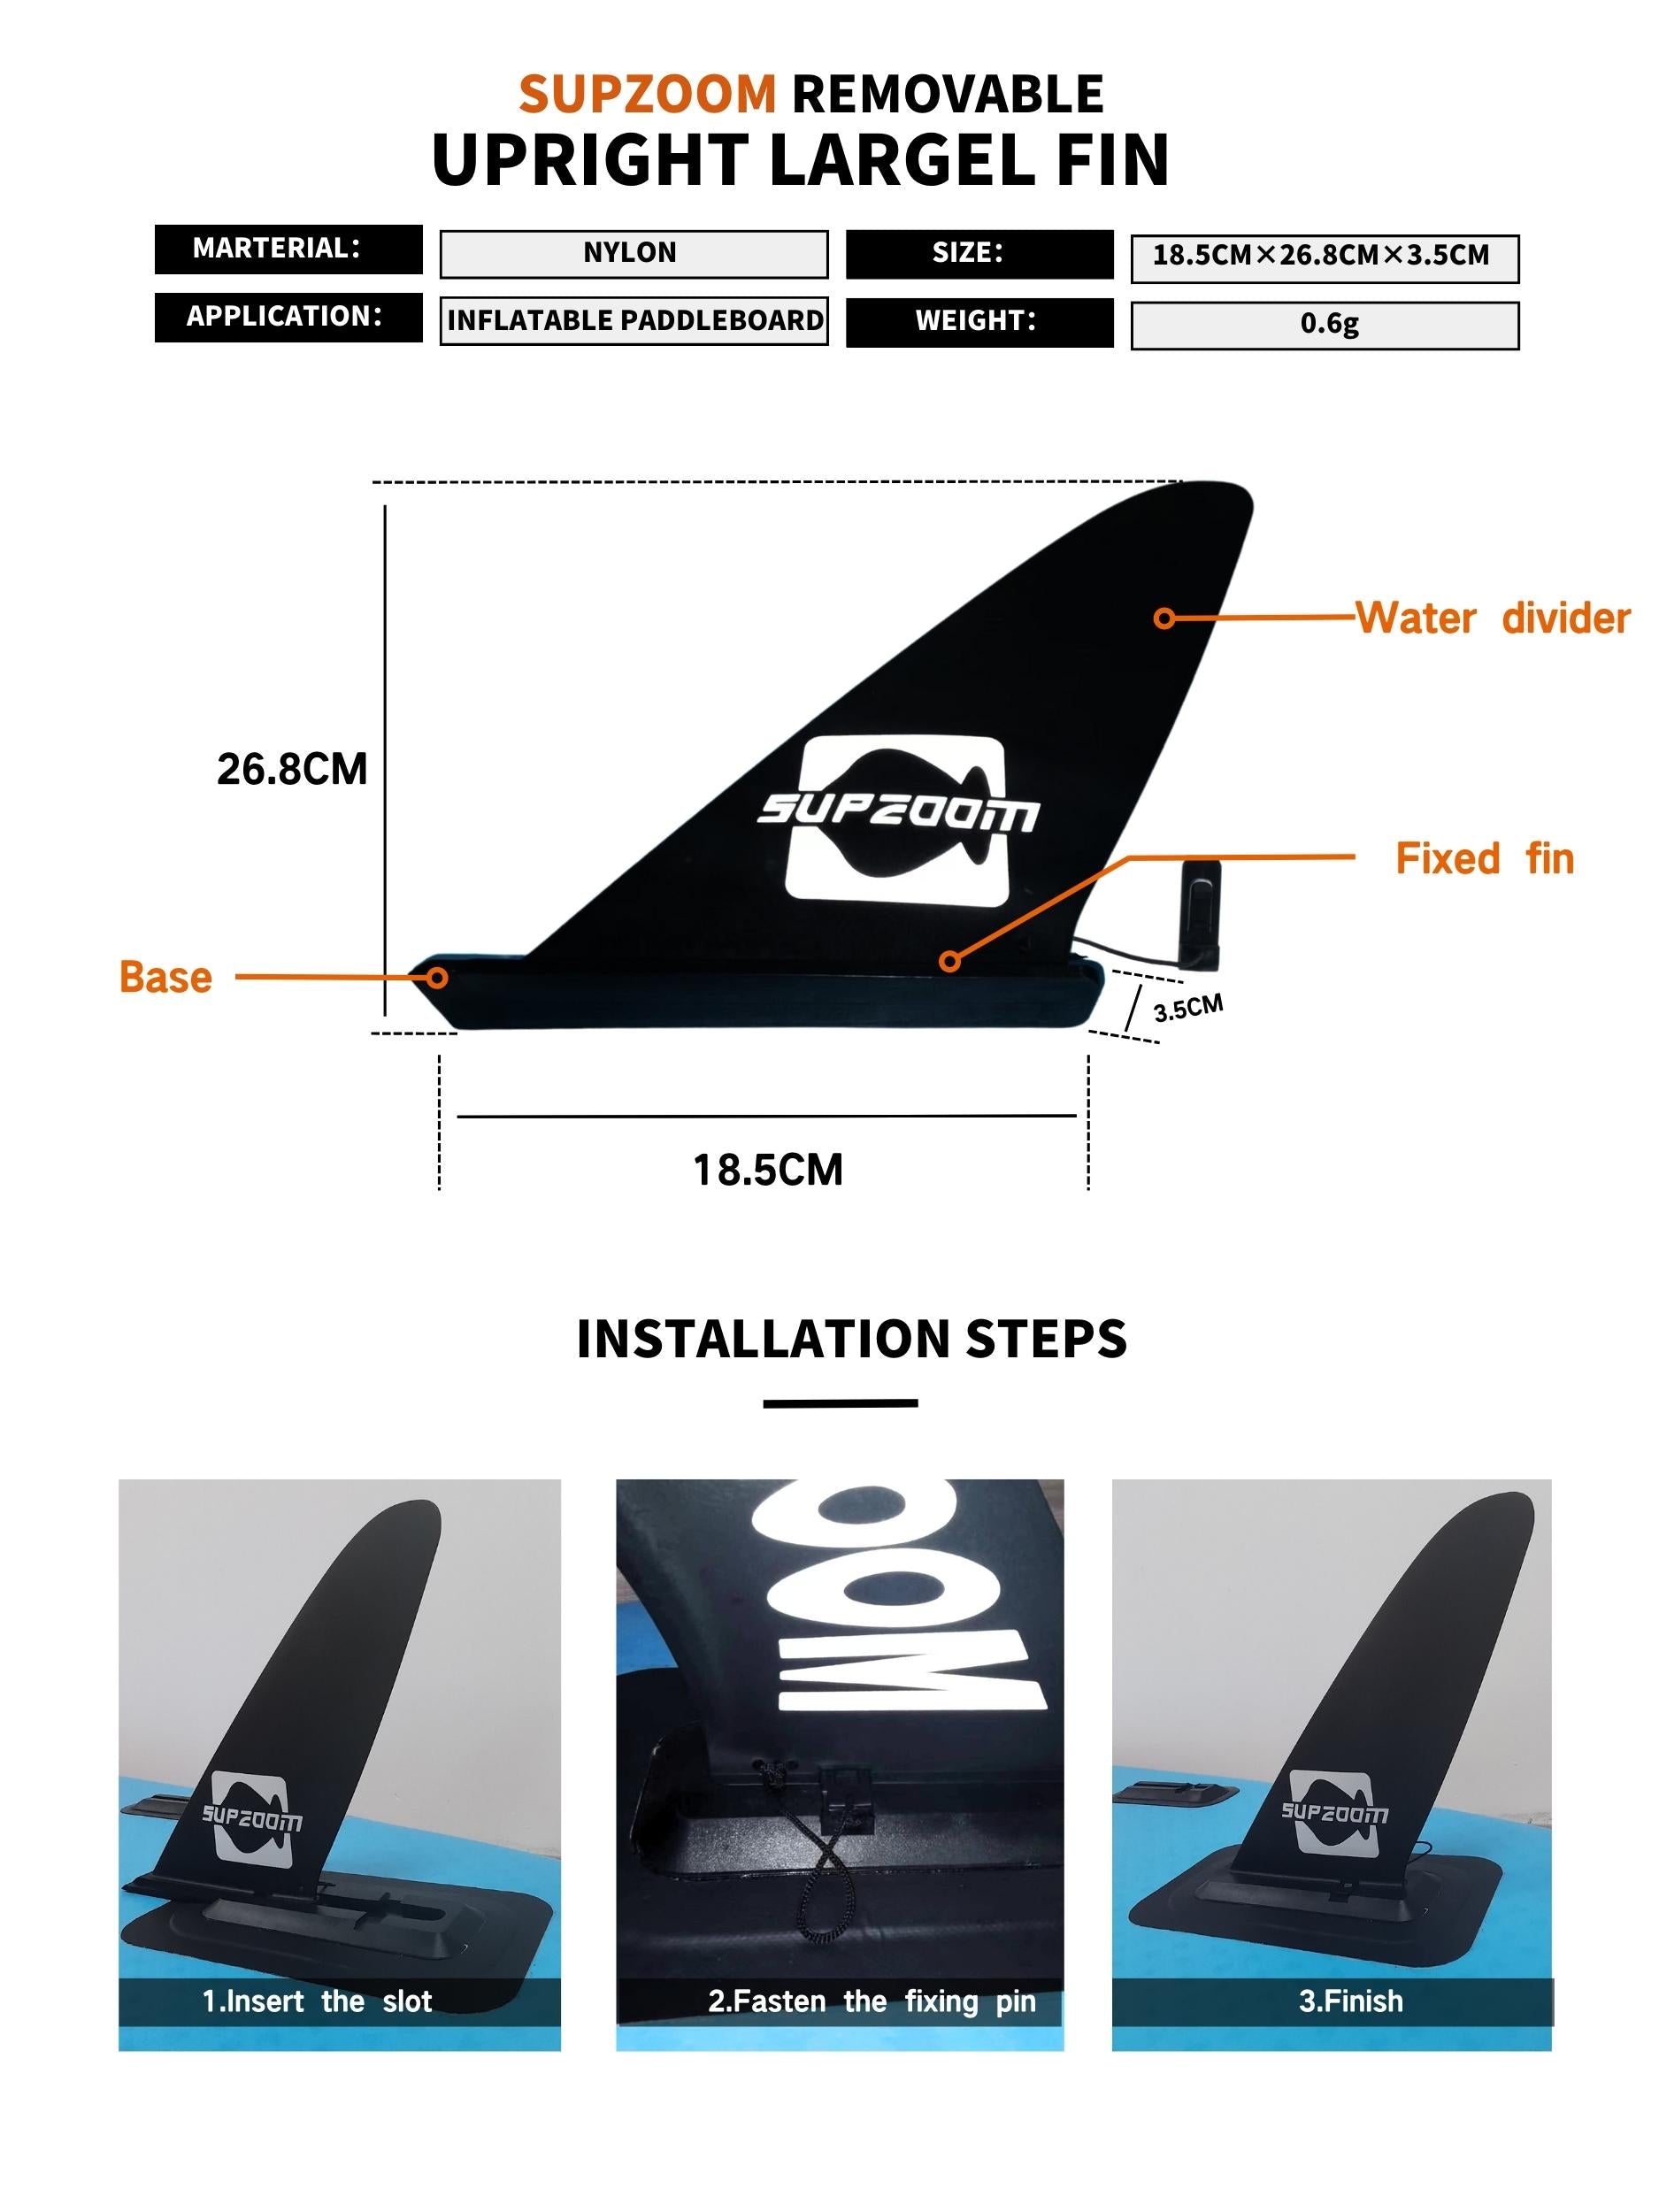 Upright Tail Fin Details